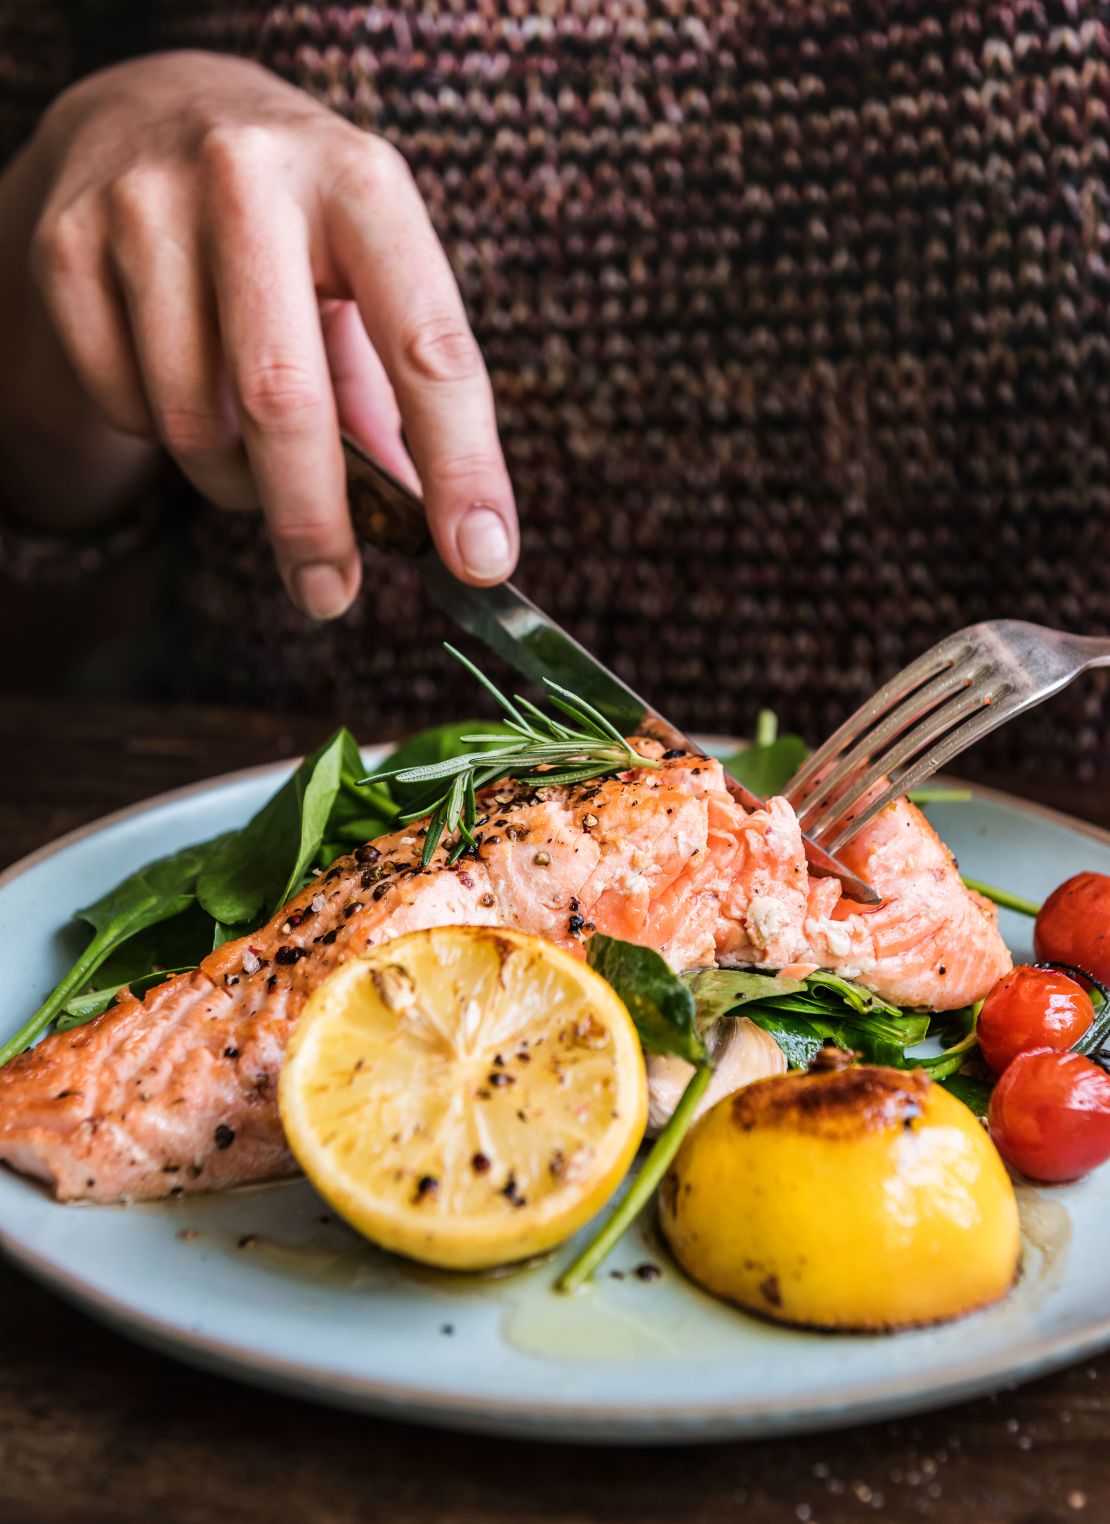 A serving of fish such as salmon can be key to lowering the risk for heart disease due to its high content of healthy omega-3 fatty acids.